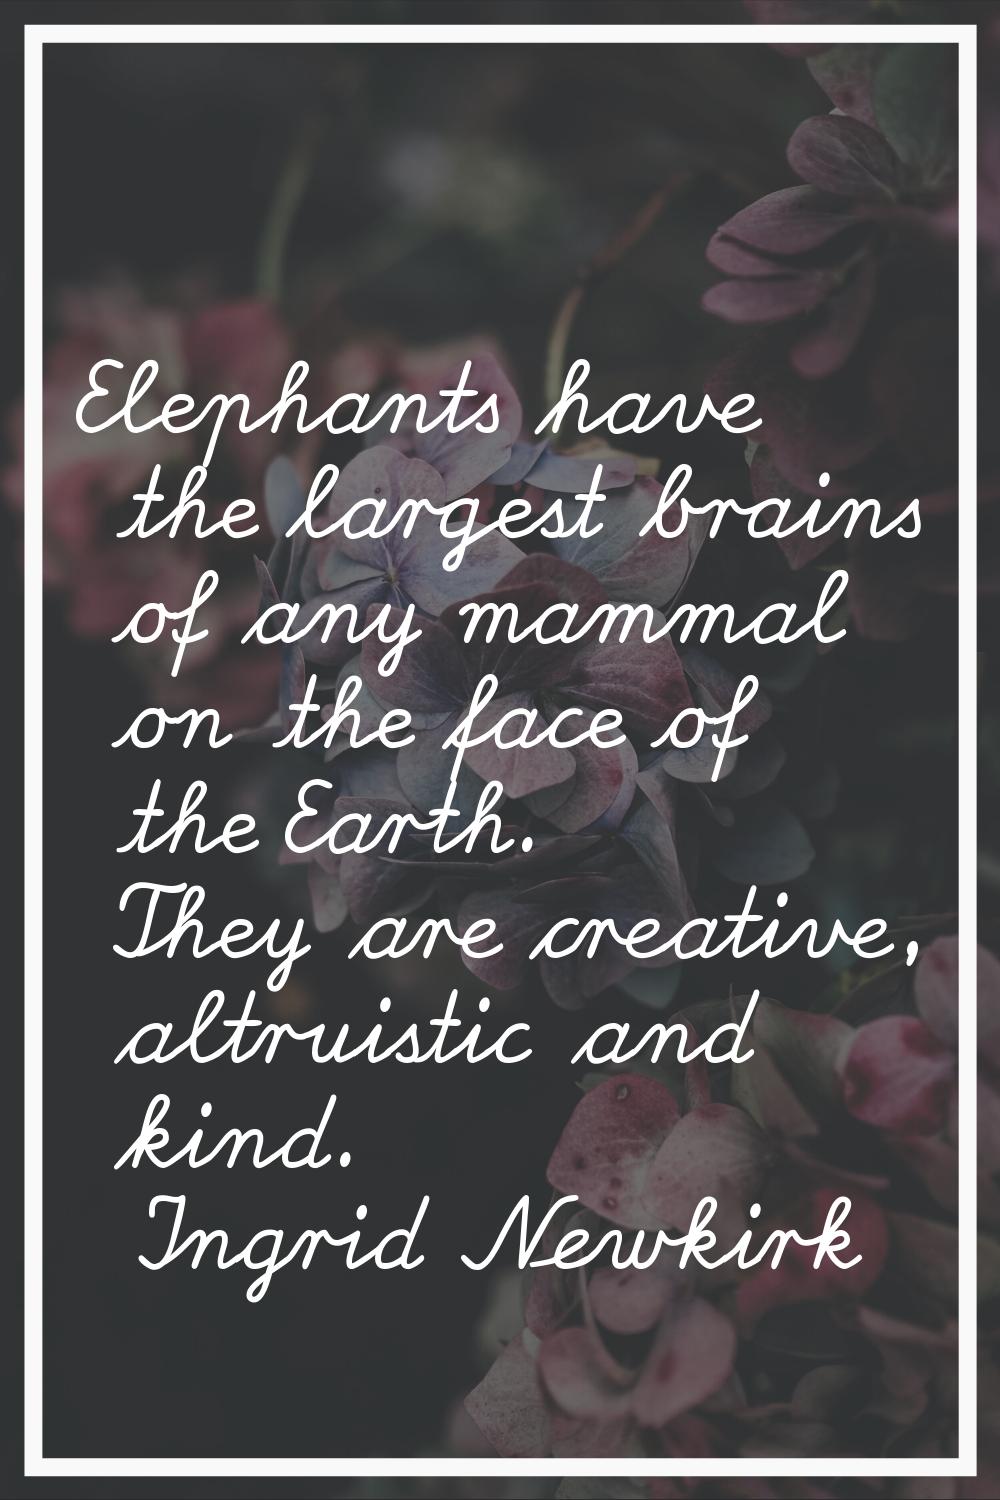 Elephants have the largest brains of any mammal on the face of the Earth. They are creative, altrui